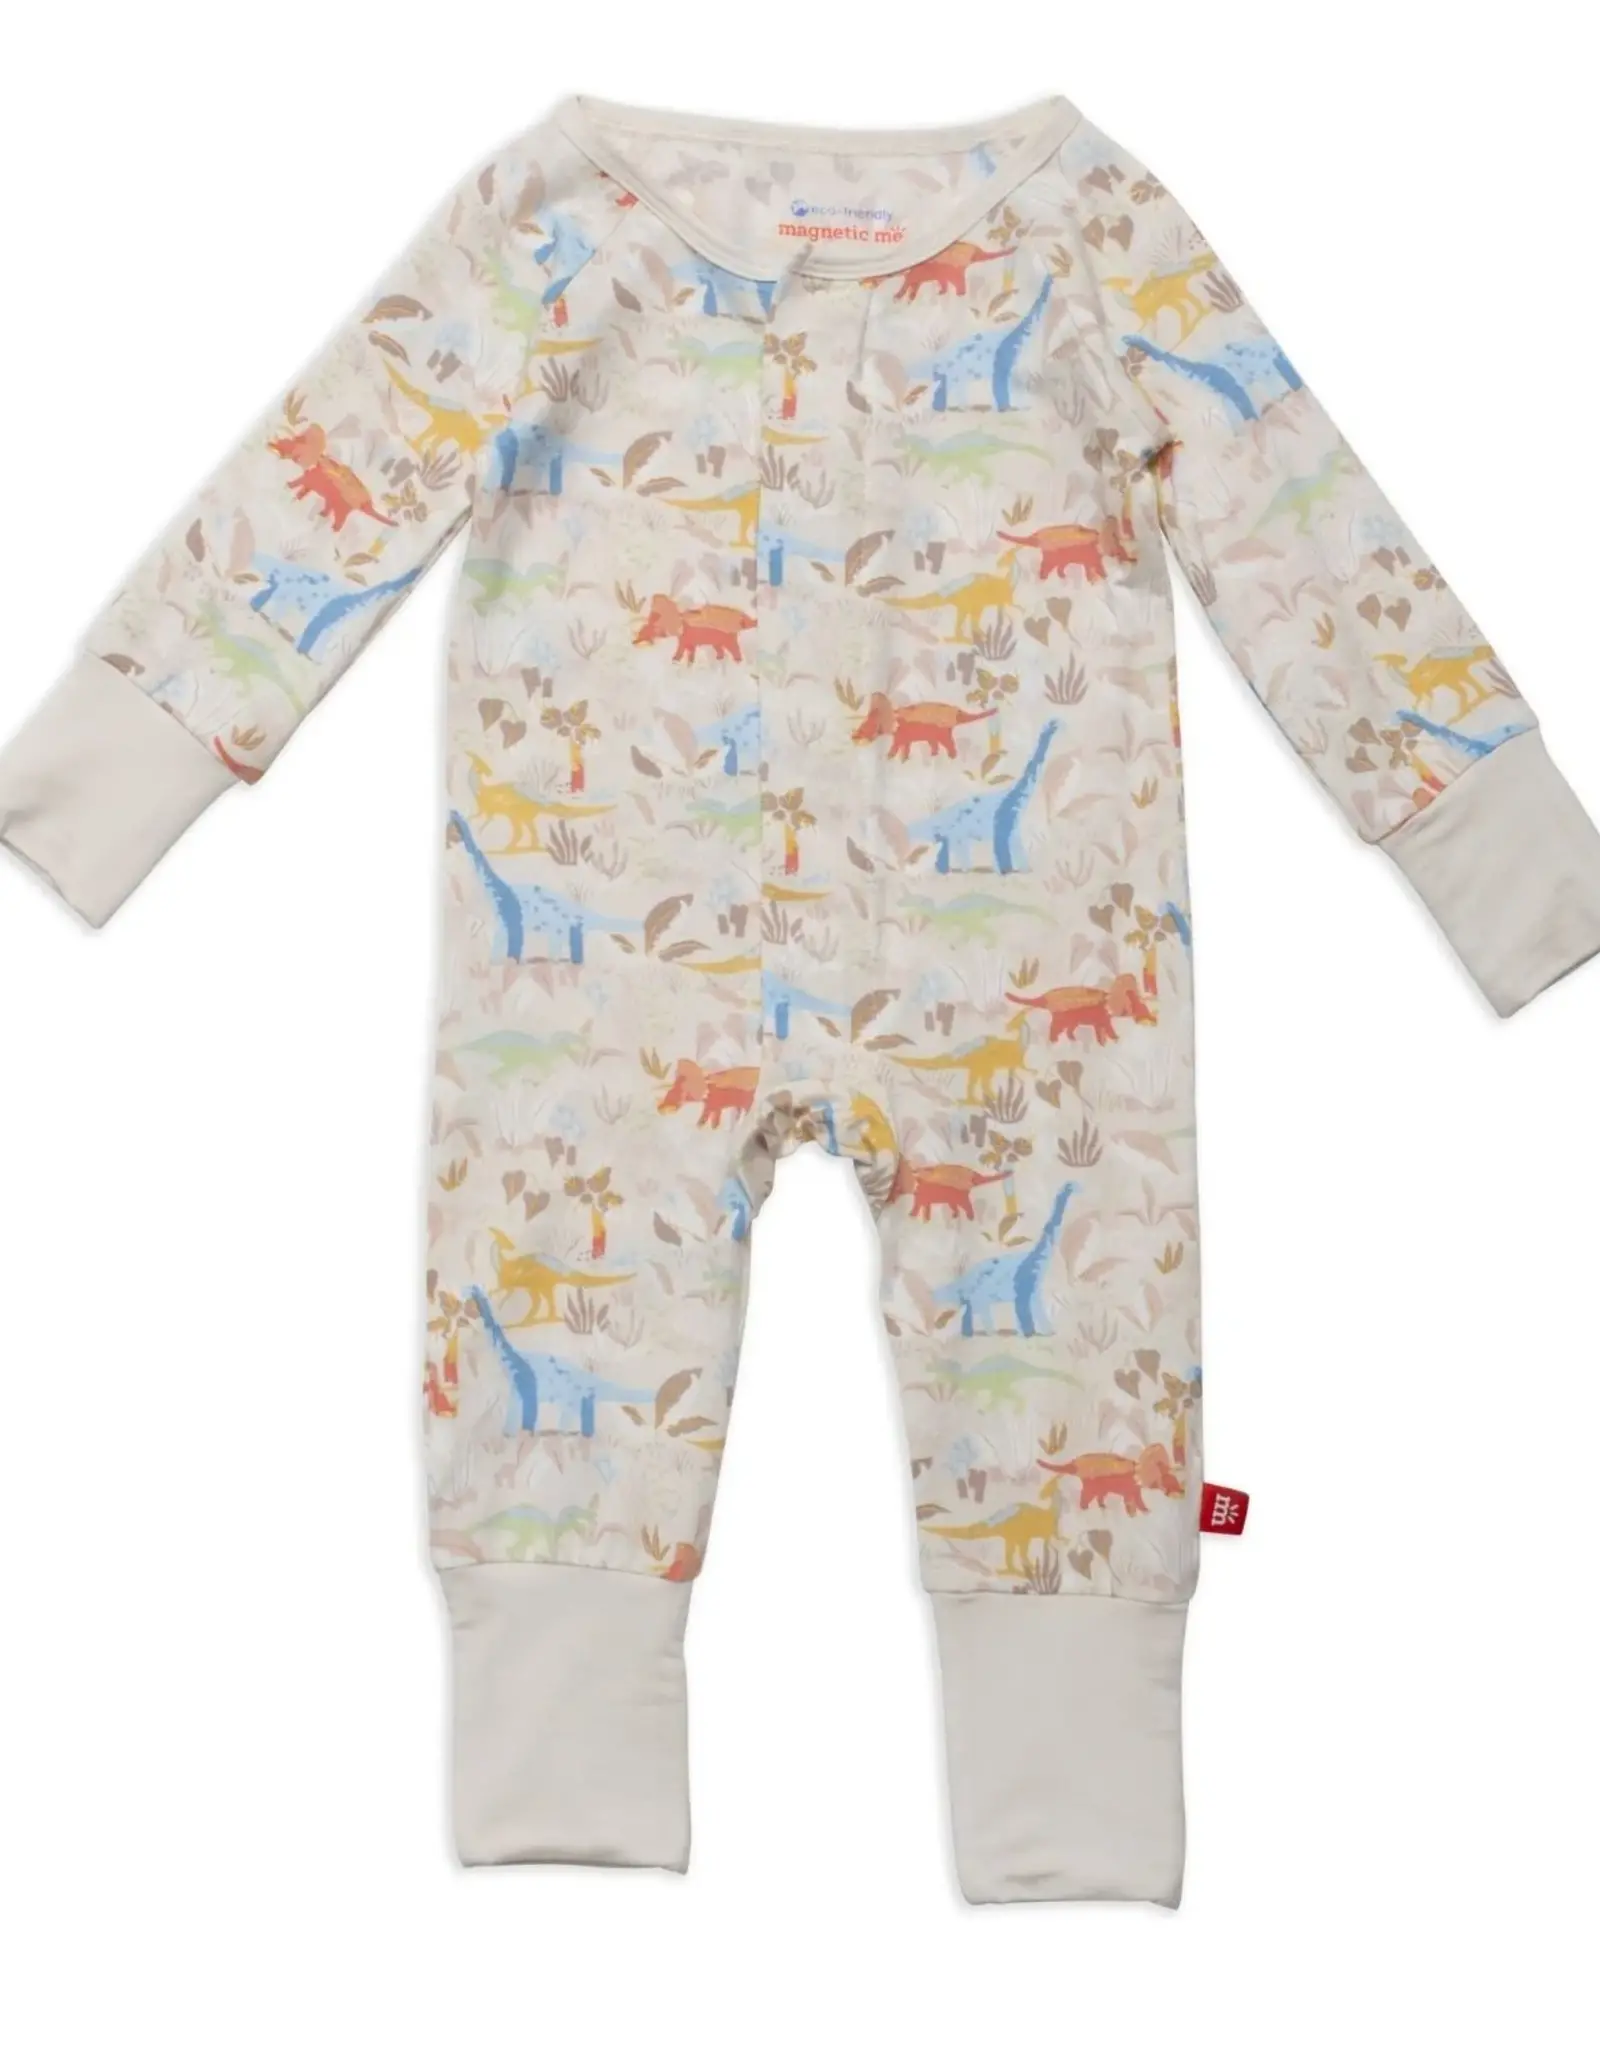 Magnetic Me 0-3MO: EXT Roar Dinary Grow With Me Coverall